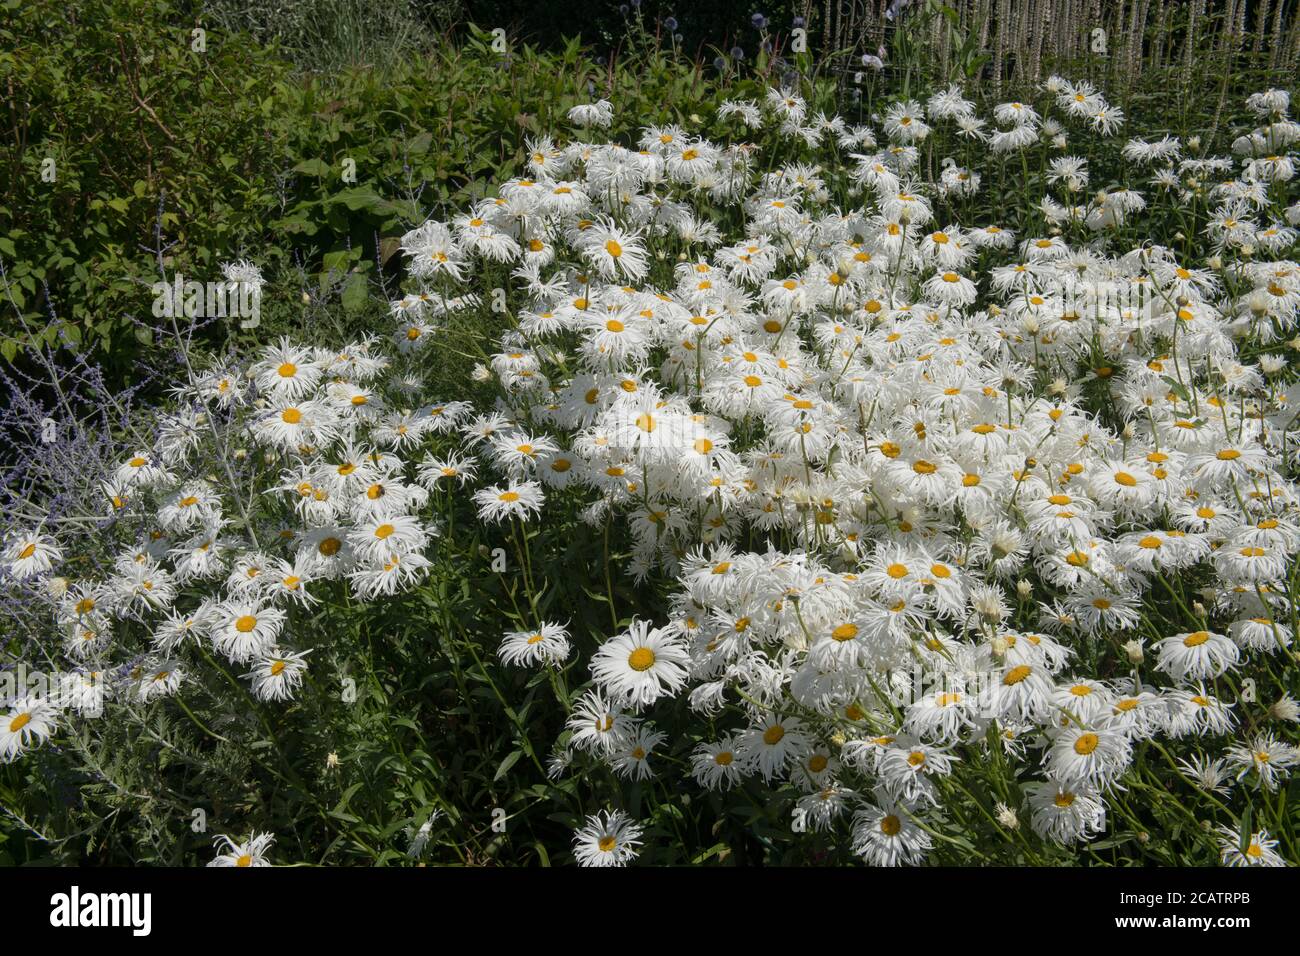 Summer Flowering White Shasta Daisies (Leucanthemum x superbum 'Phyllis Smith') Growing in a Herbaceous Border in a Country Cottage Garden in Rural De Stock Photo